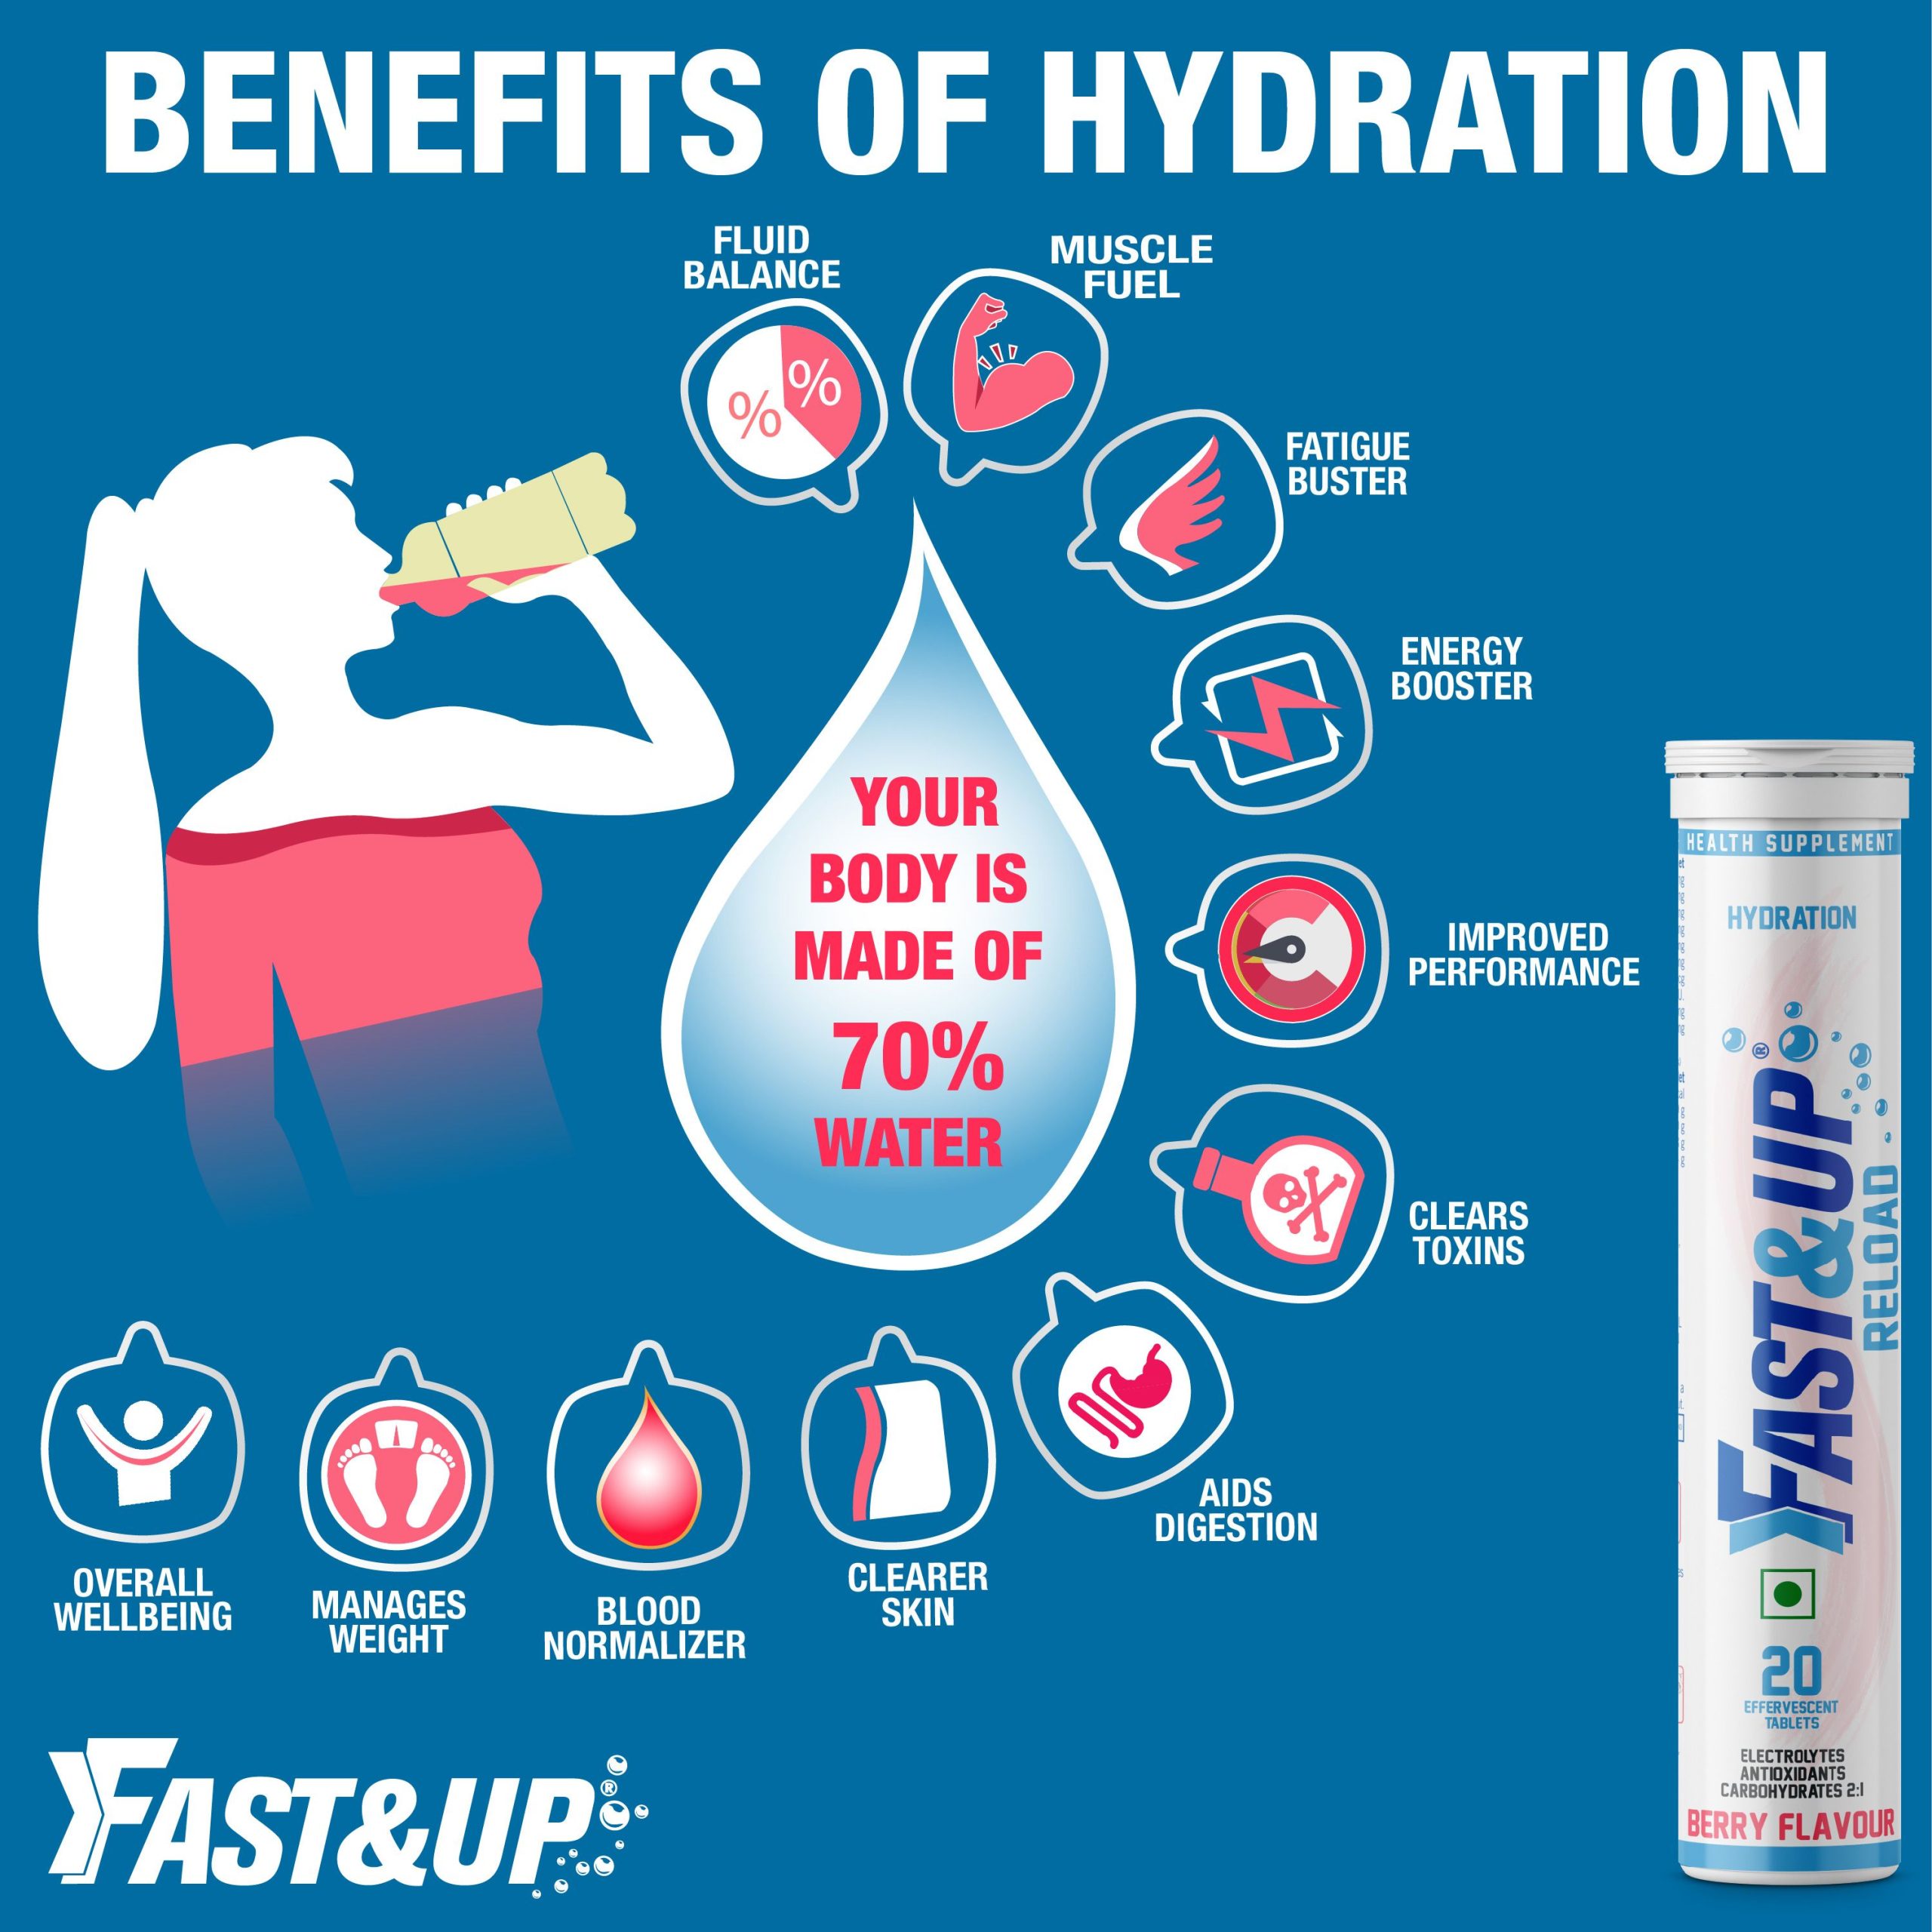 Hydration Strategies for Optimal Athletic Performance